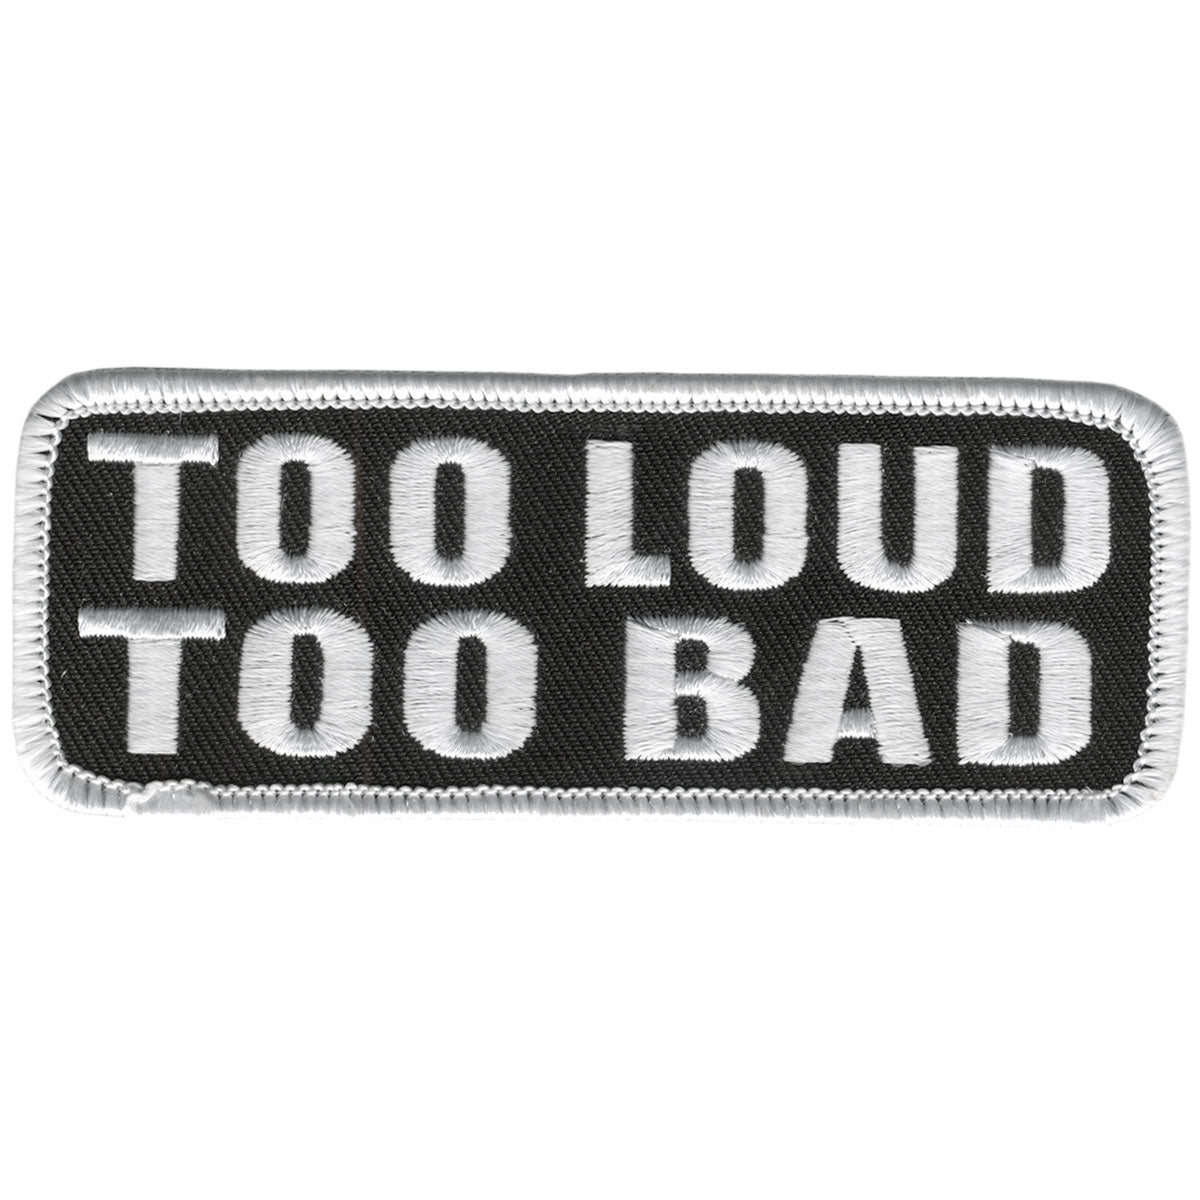 Hot Leathers PPL9203 Too Loud Too Bad 4" x 2" Patch